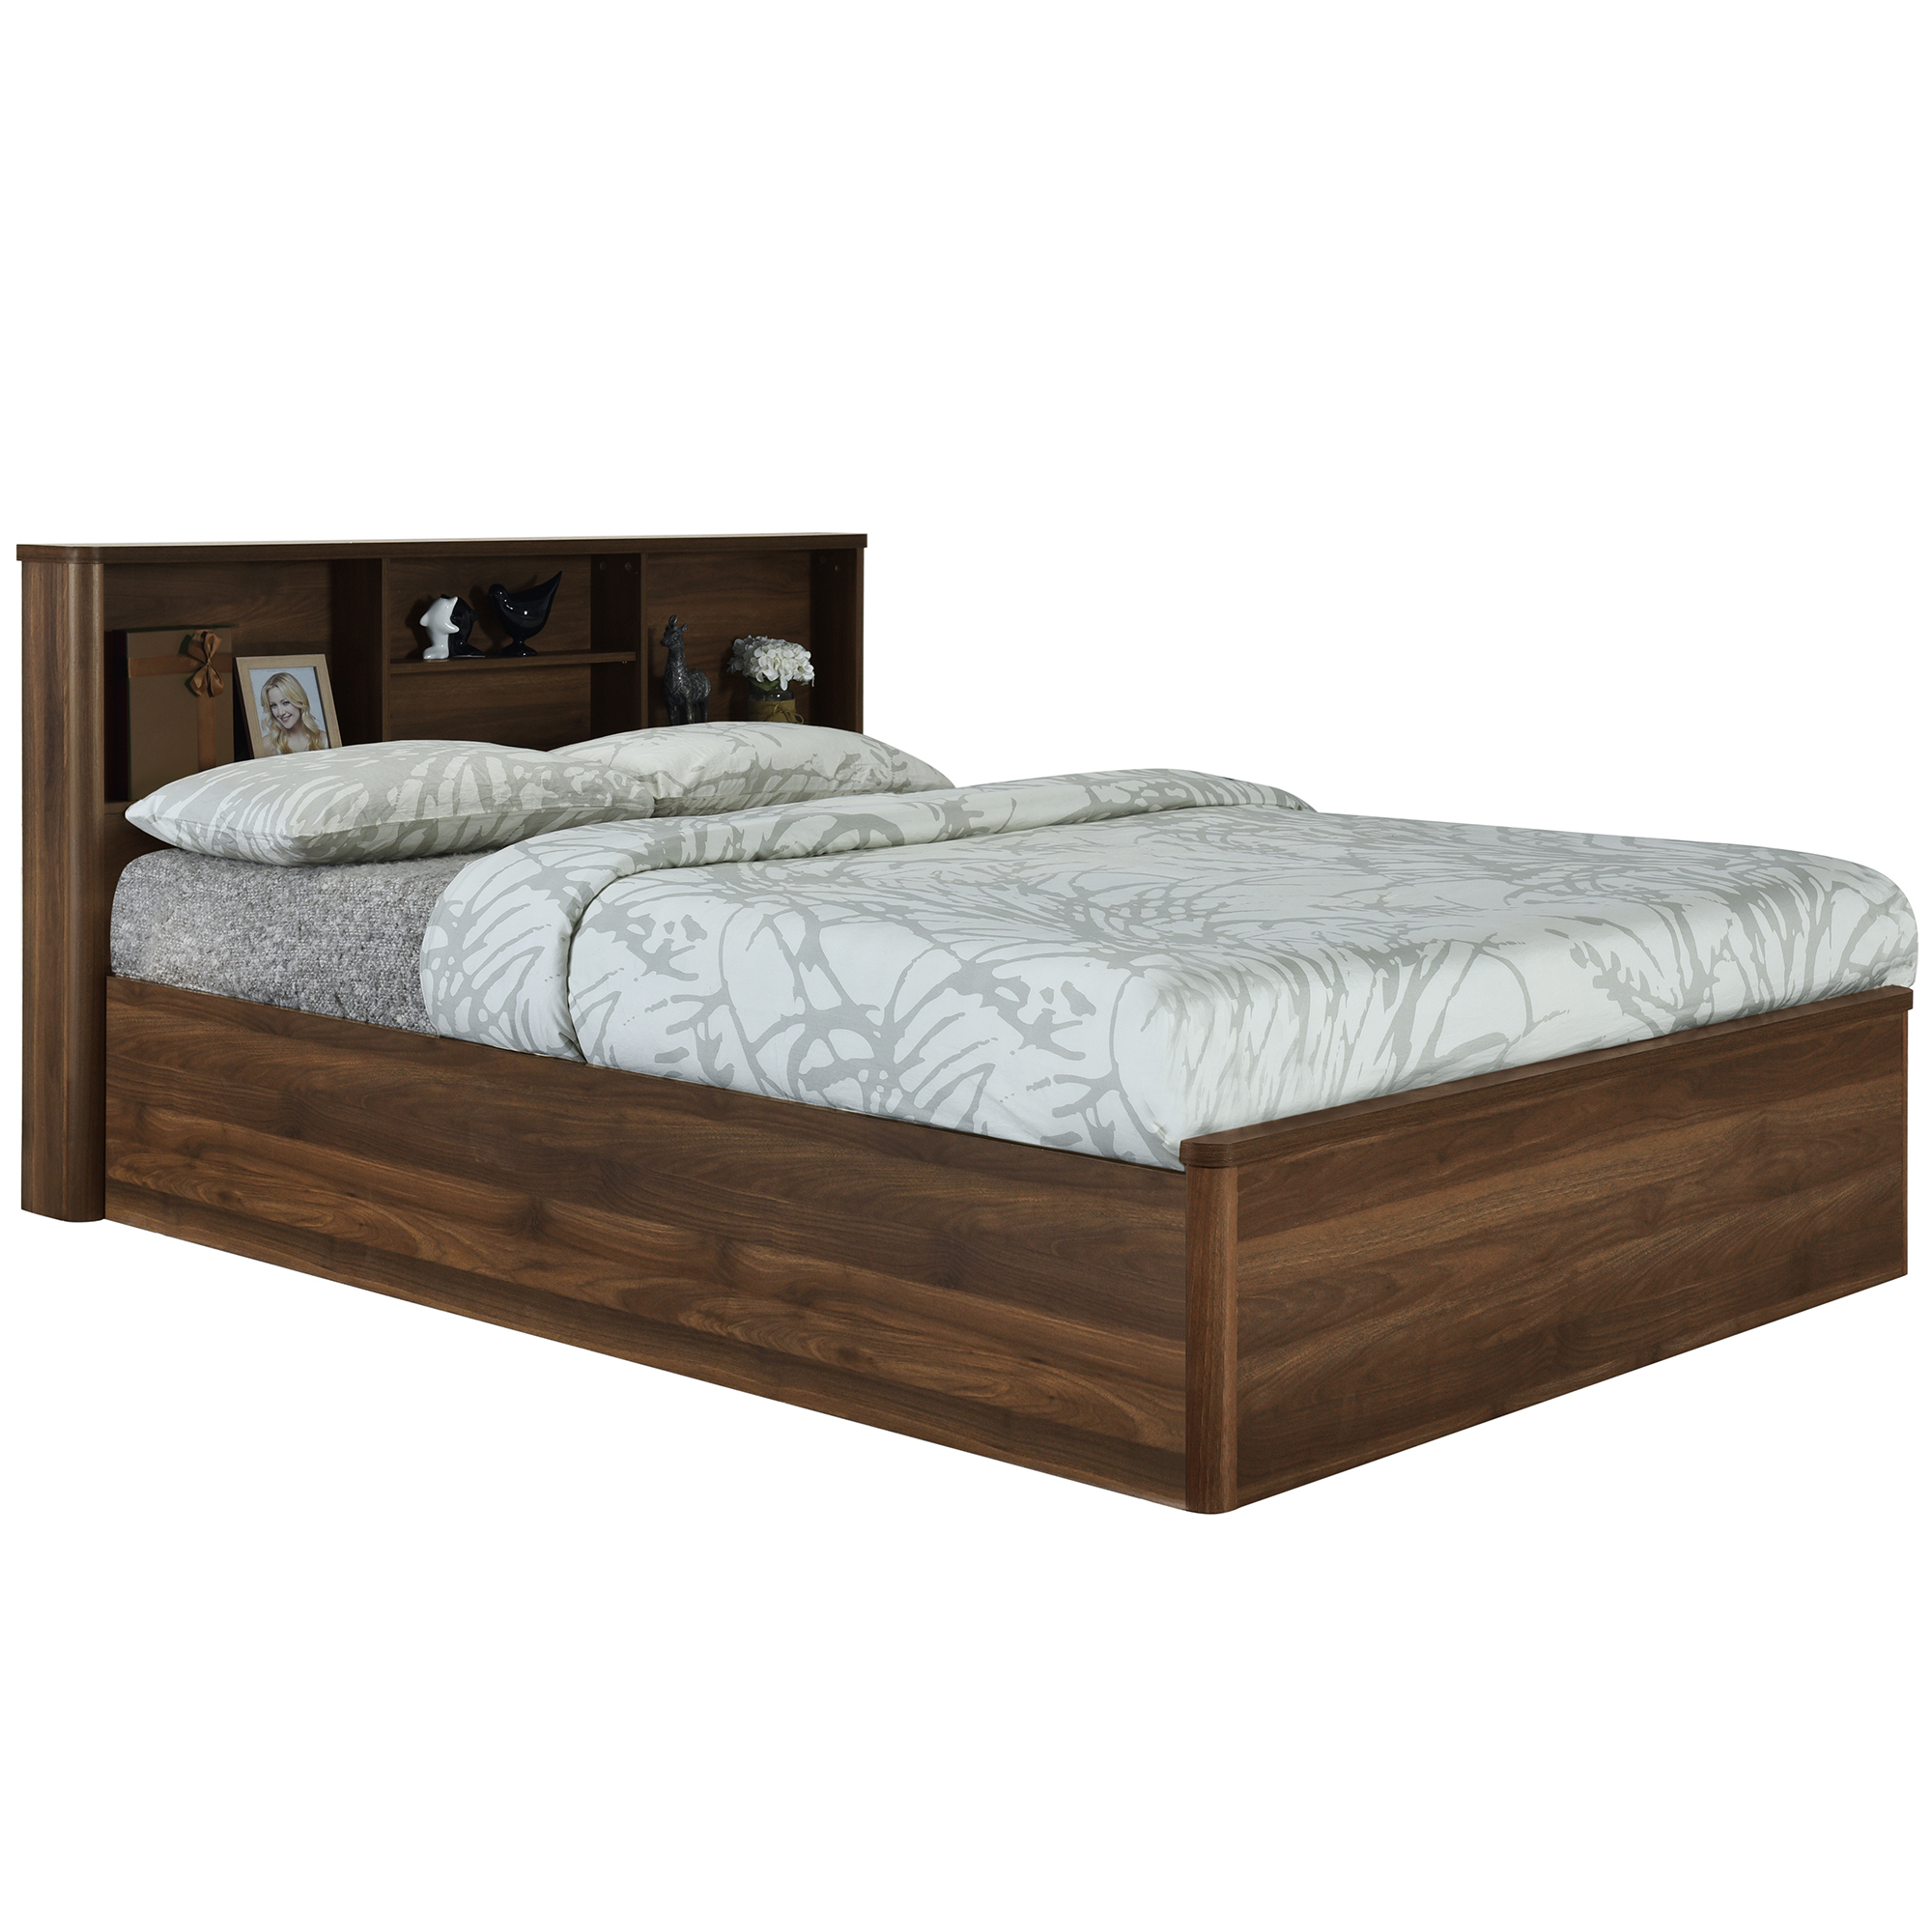 Core Living Anderson Queen Bed With, Queen Size Headboard And Frame